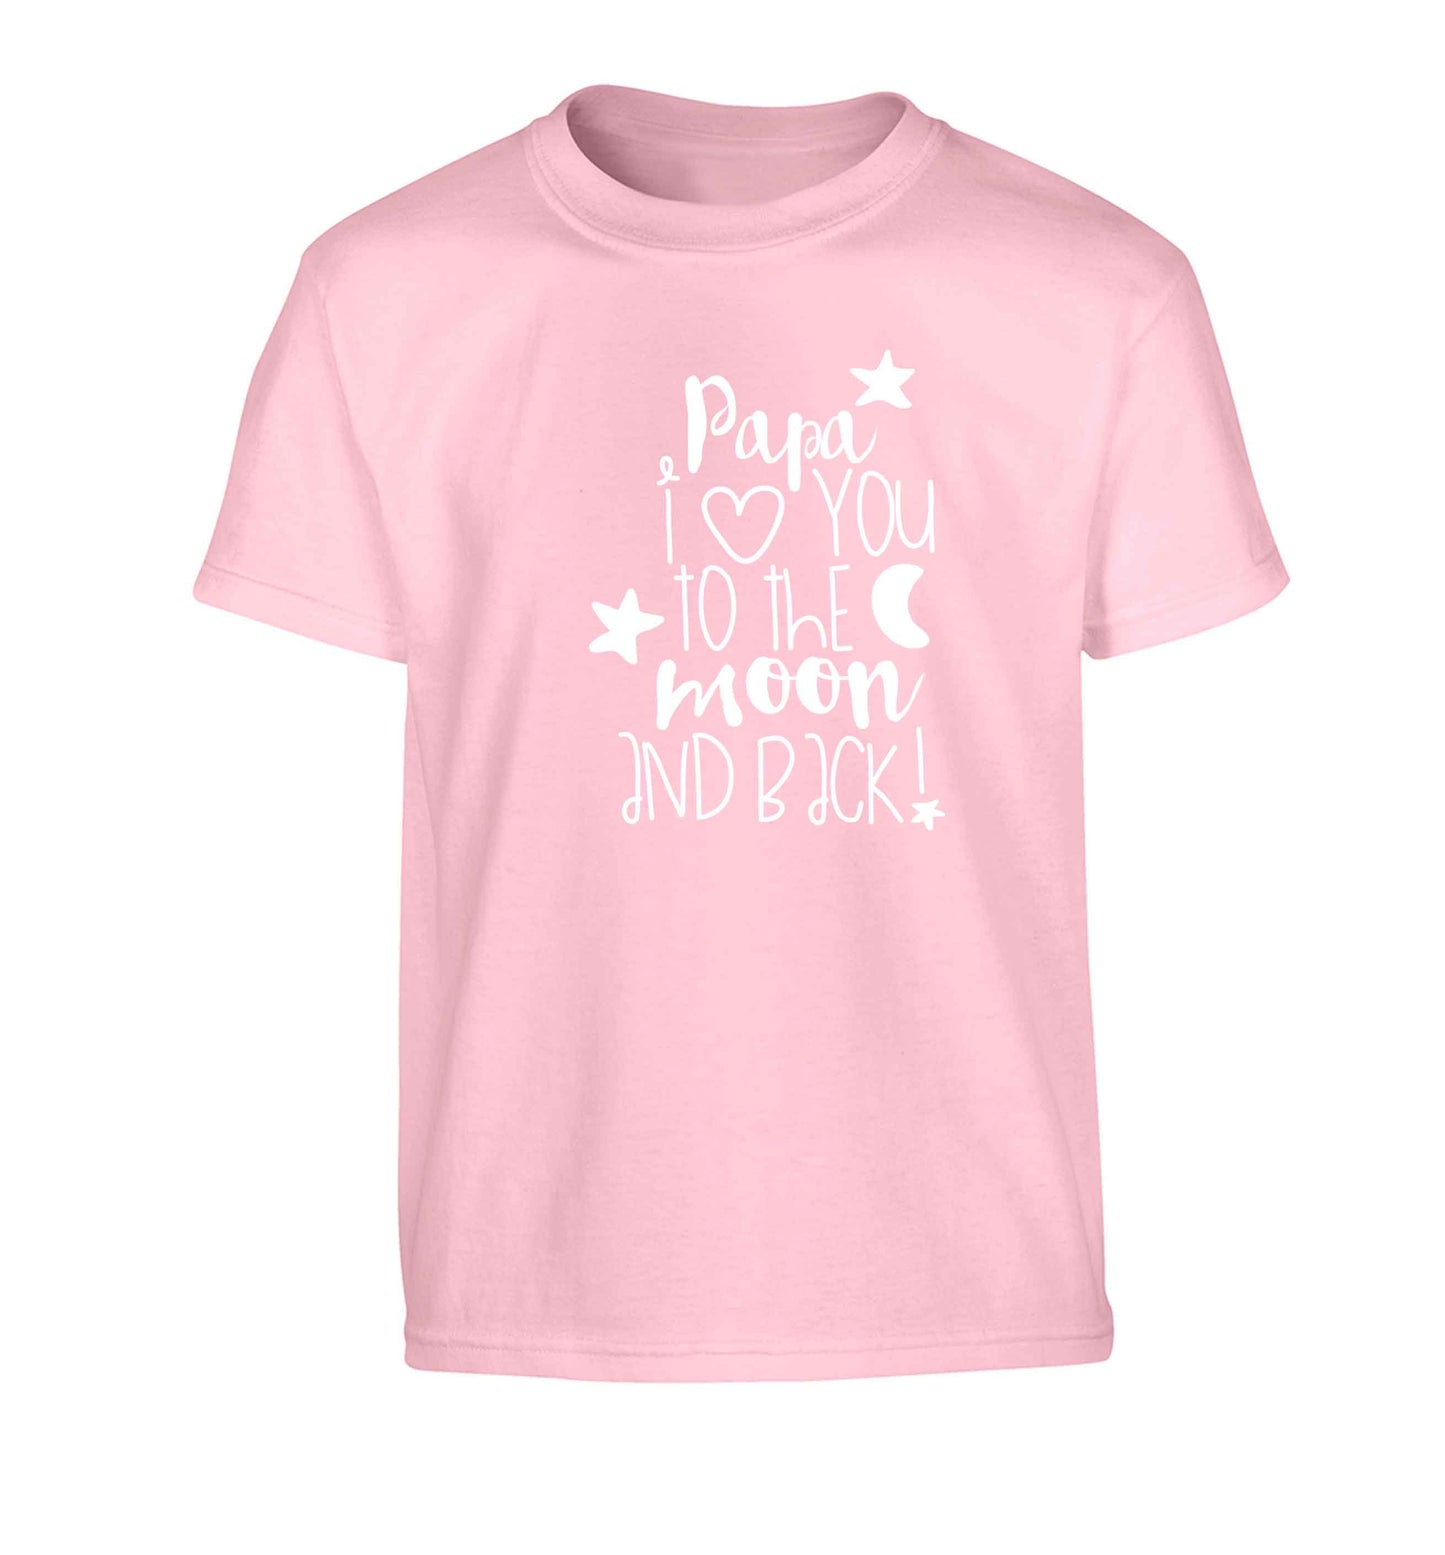 Papa I love you to the moon and back Children's light pink Tshirt 12-13 Years